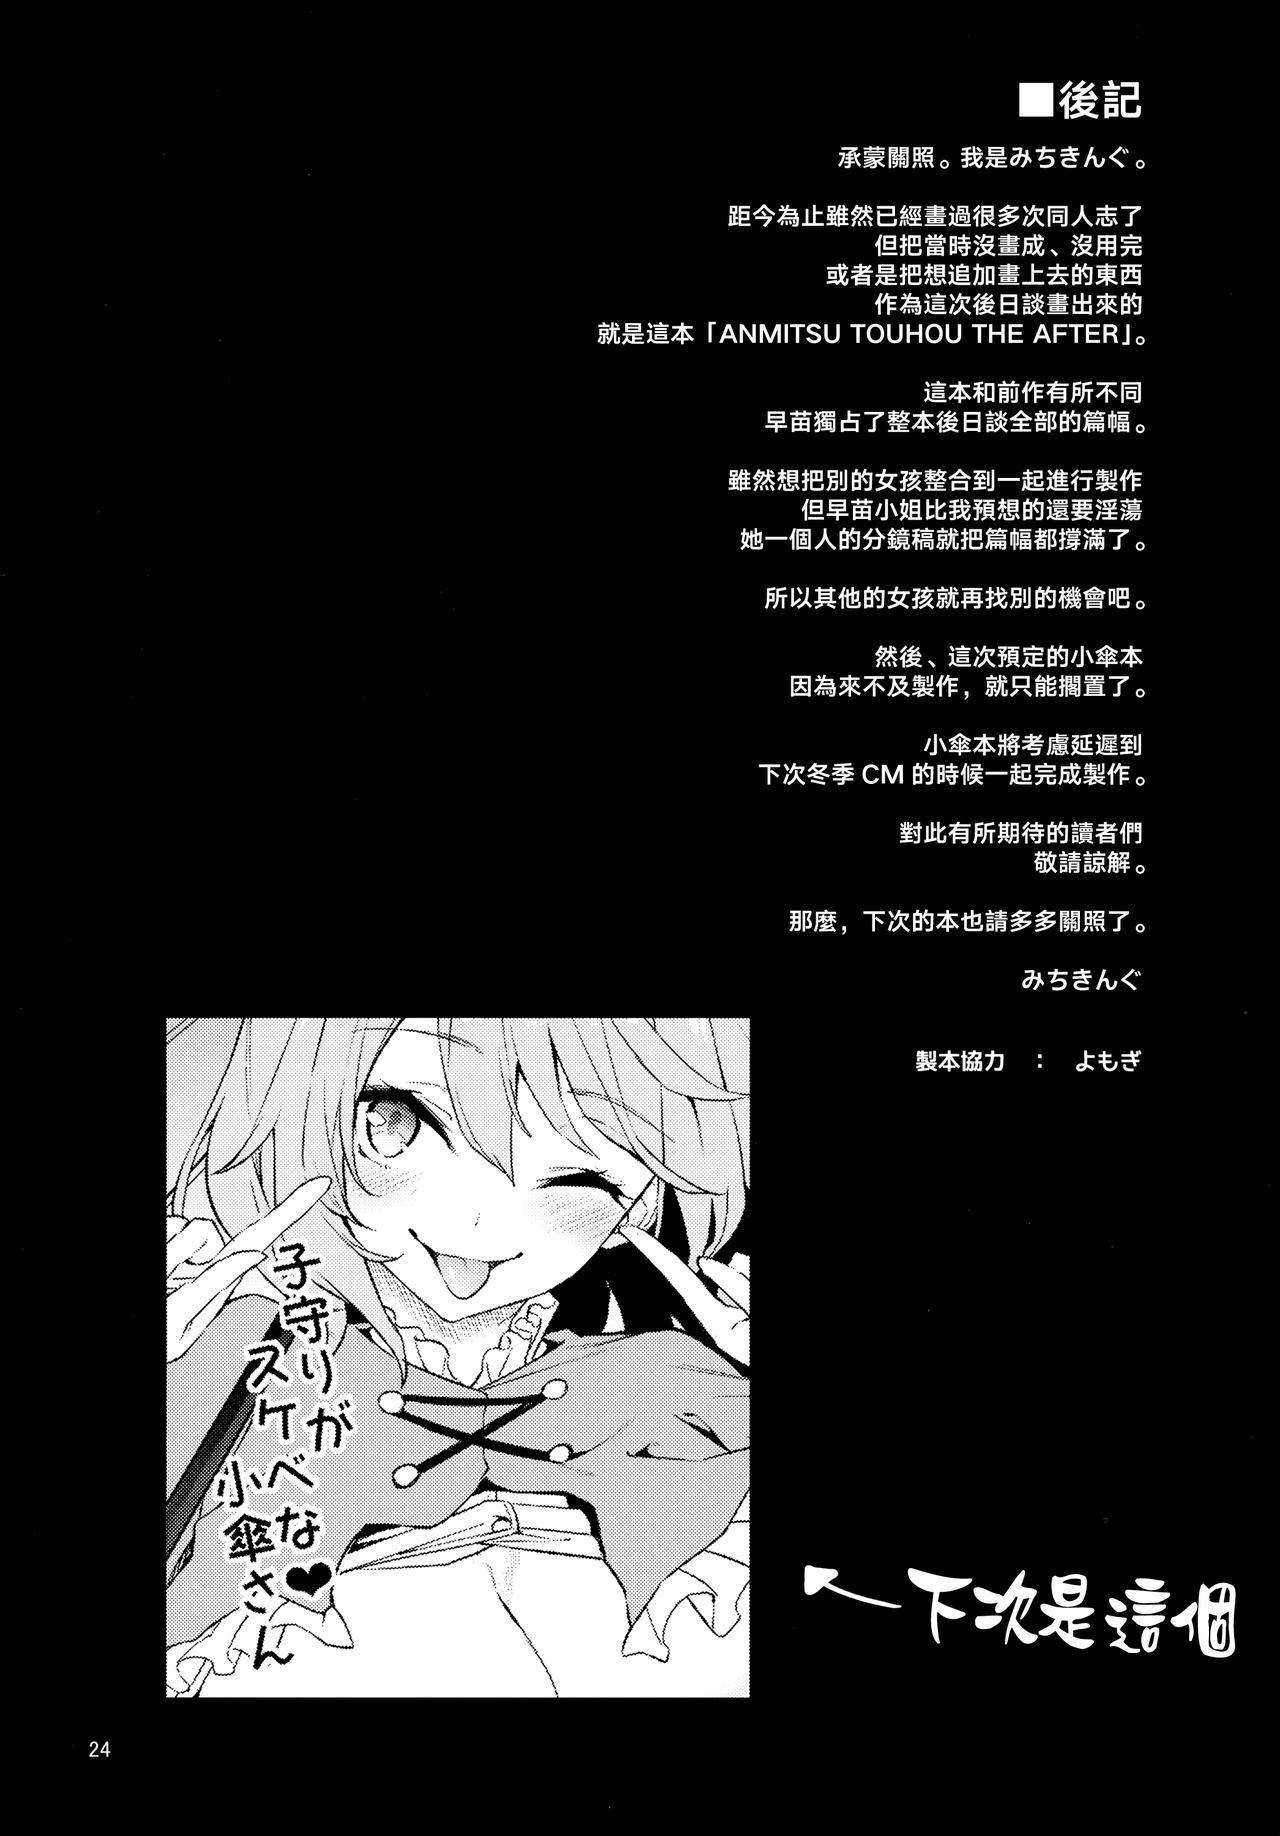 ANMITSU TOUHOU THE AFTER Vol.2 24